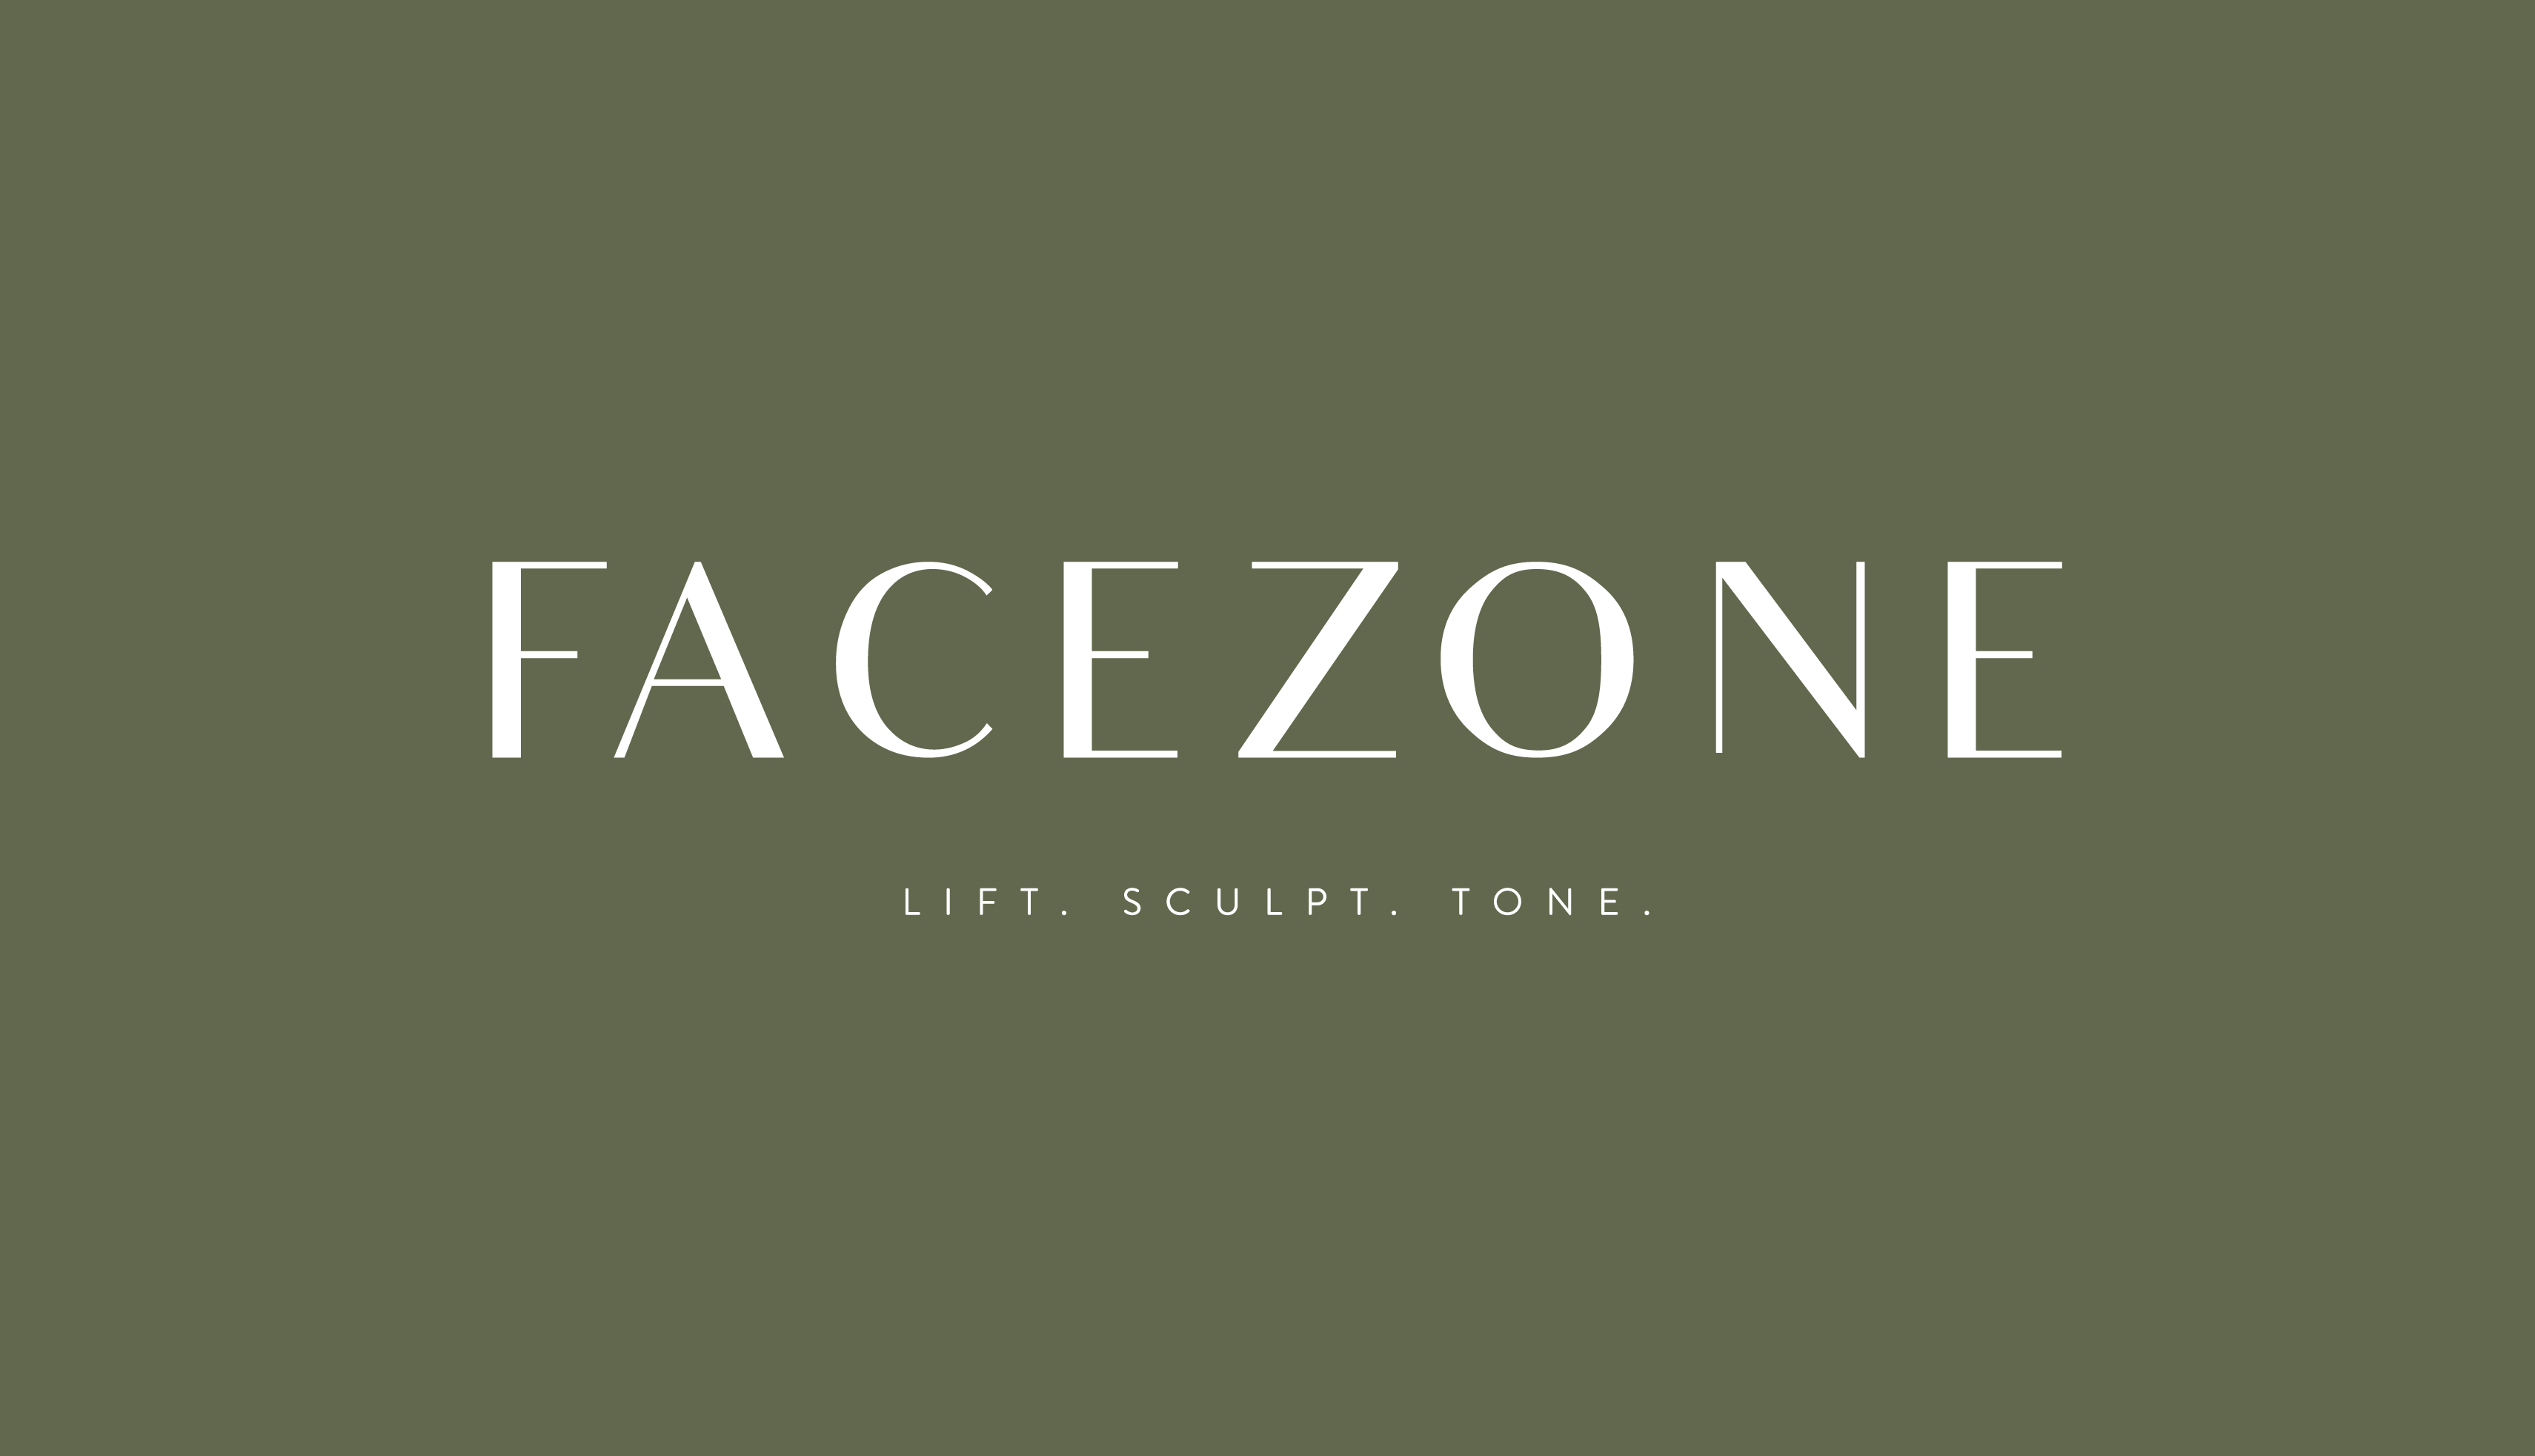 Face zone